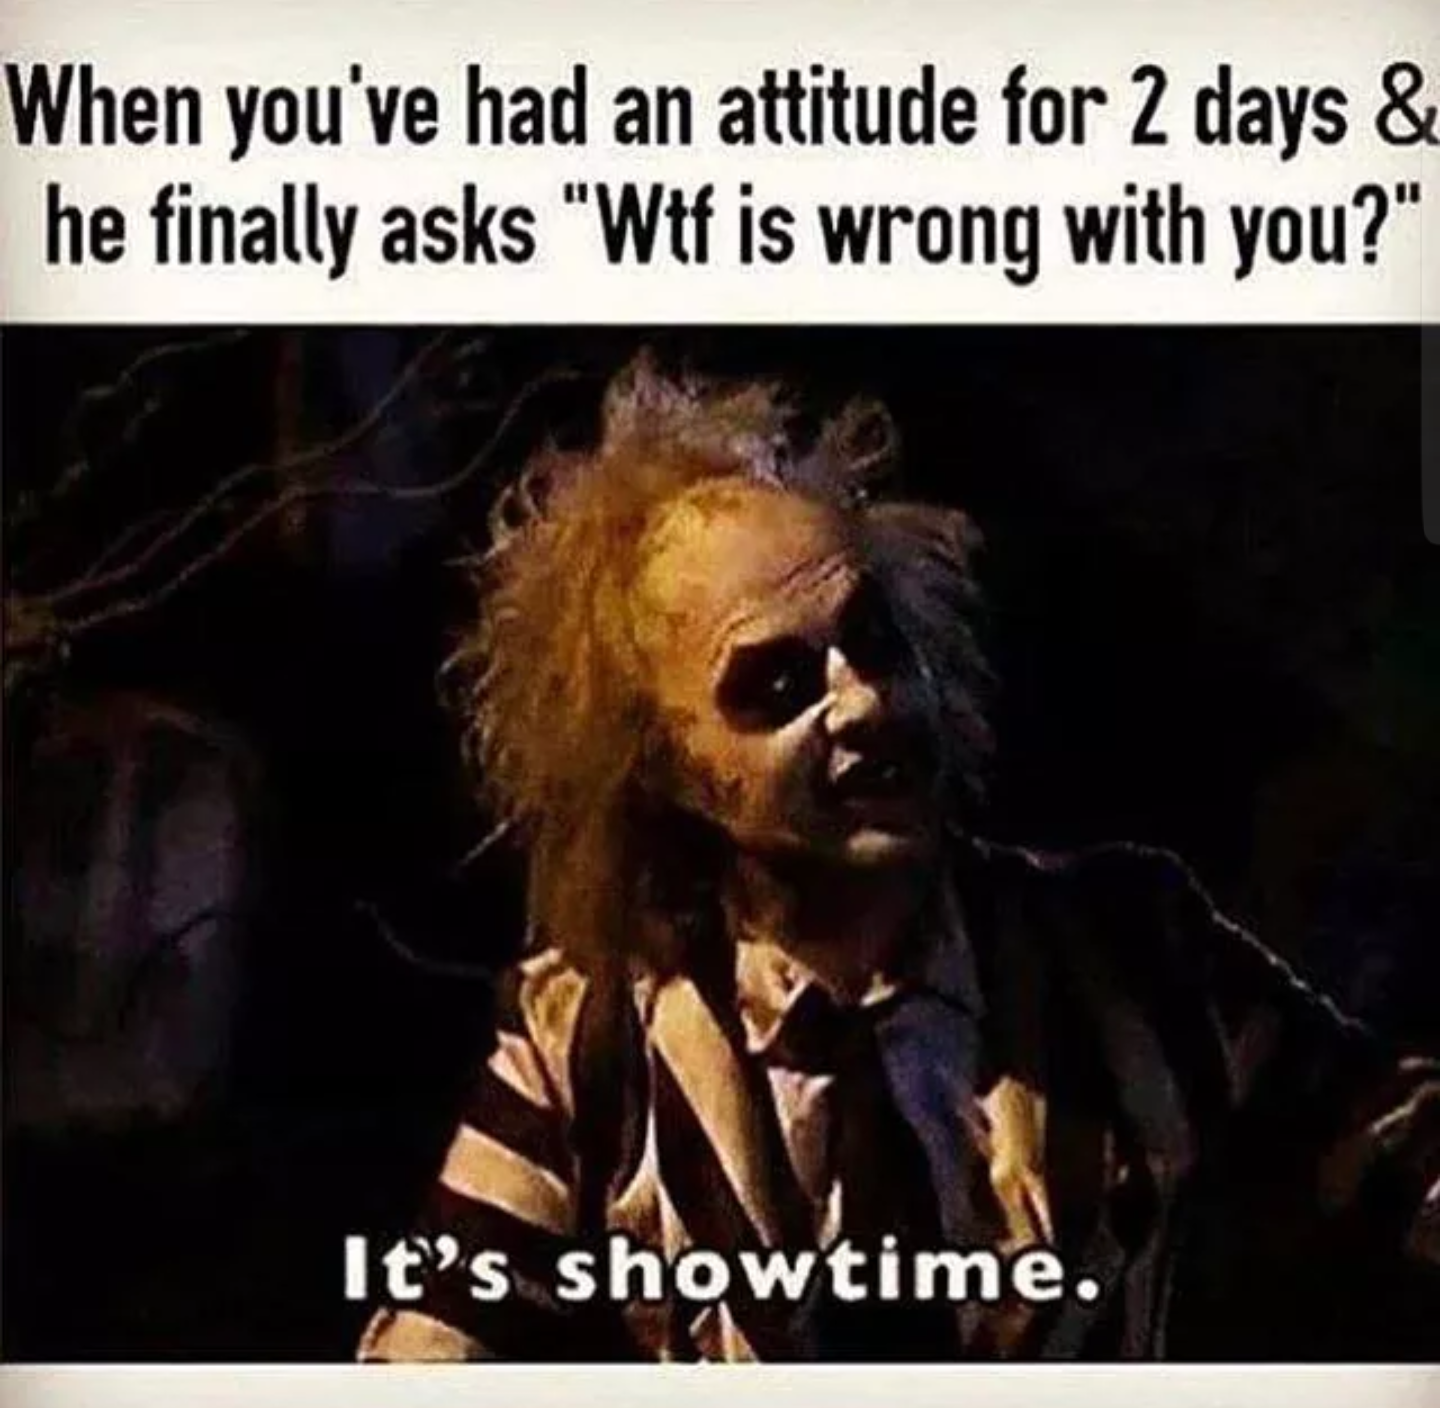 funny beetlejuice meme about when you had an attitude for 2 days and he finally asks what is wrong with you